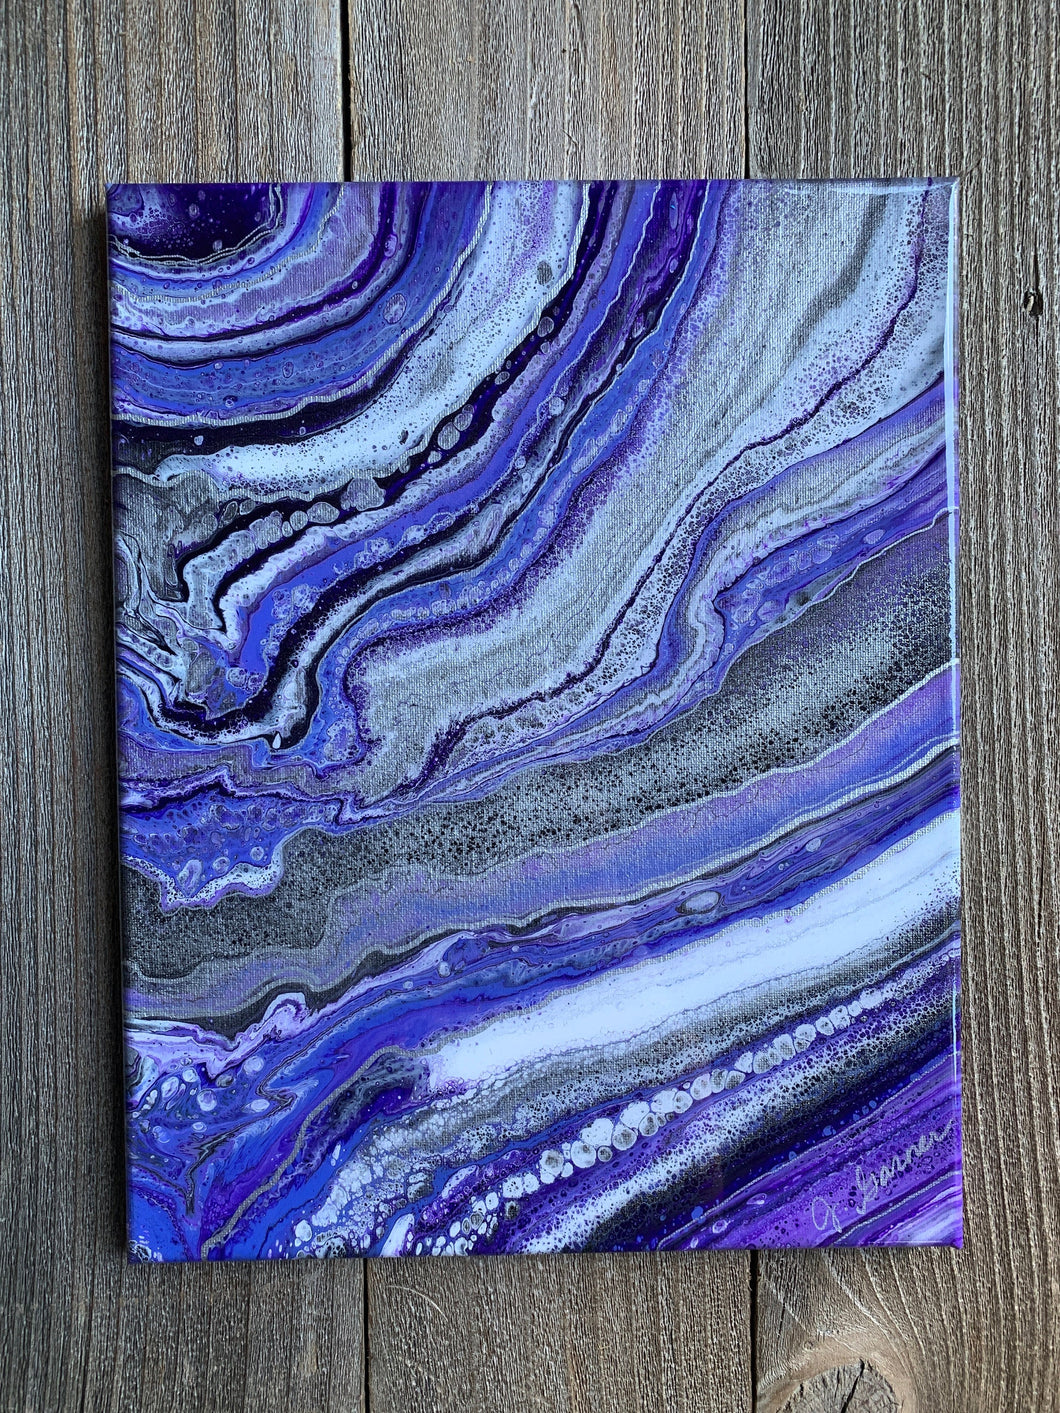 Acrylic Pour Painting 11x14 Finished in Resin Purple and Silver